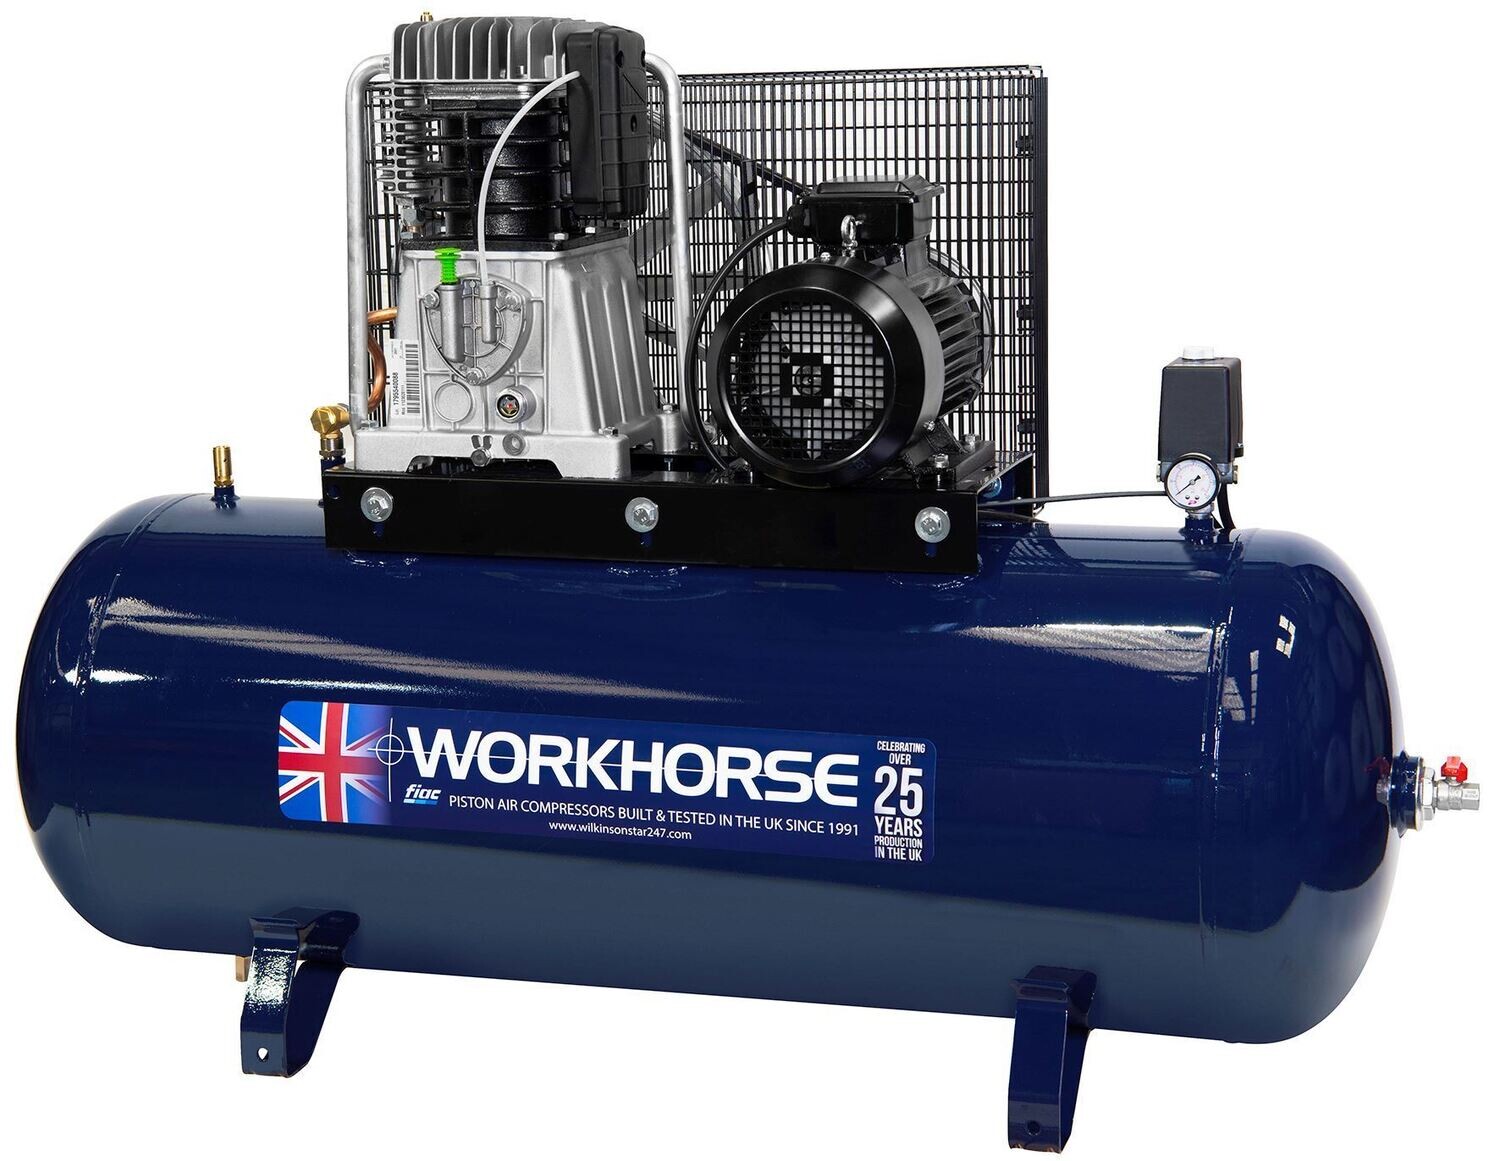 Workhorse Air Compressor 10HP 270L 400V (WRN10HP-270S)
( Available with free of charge UK mainland delivery )